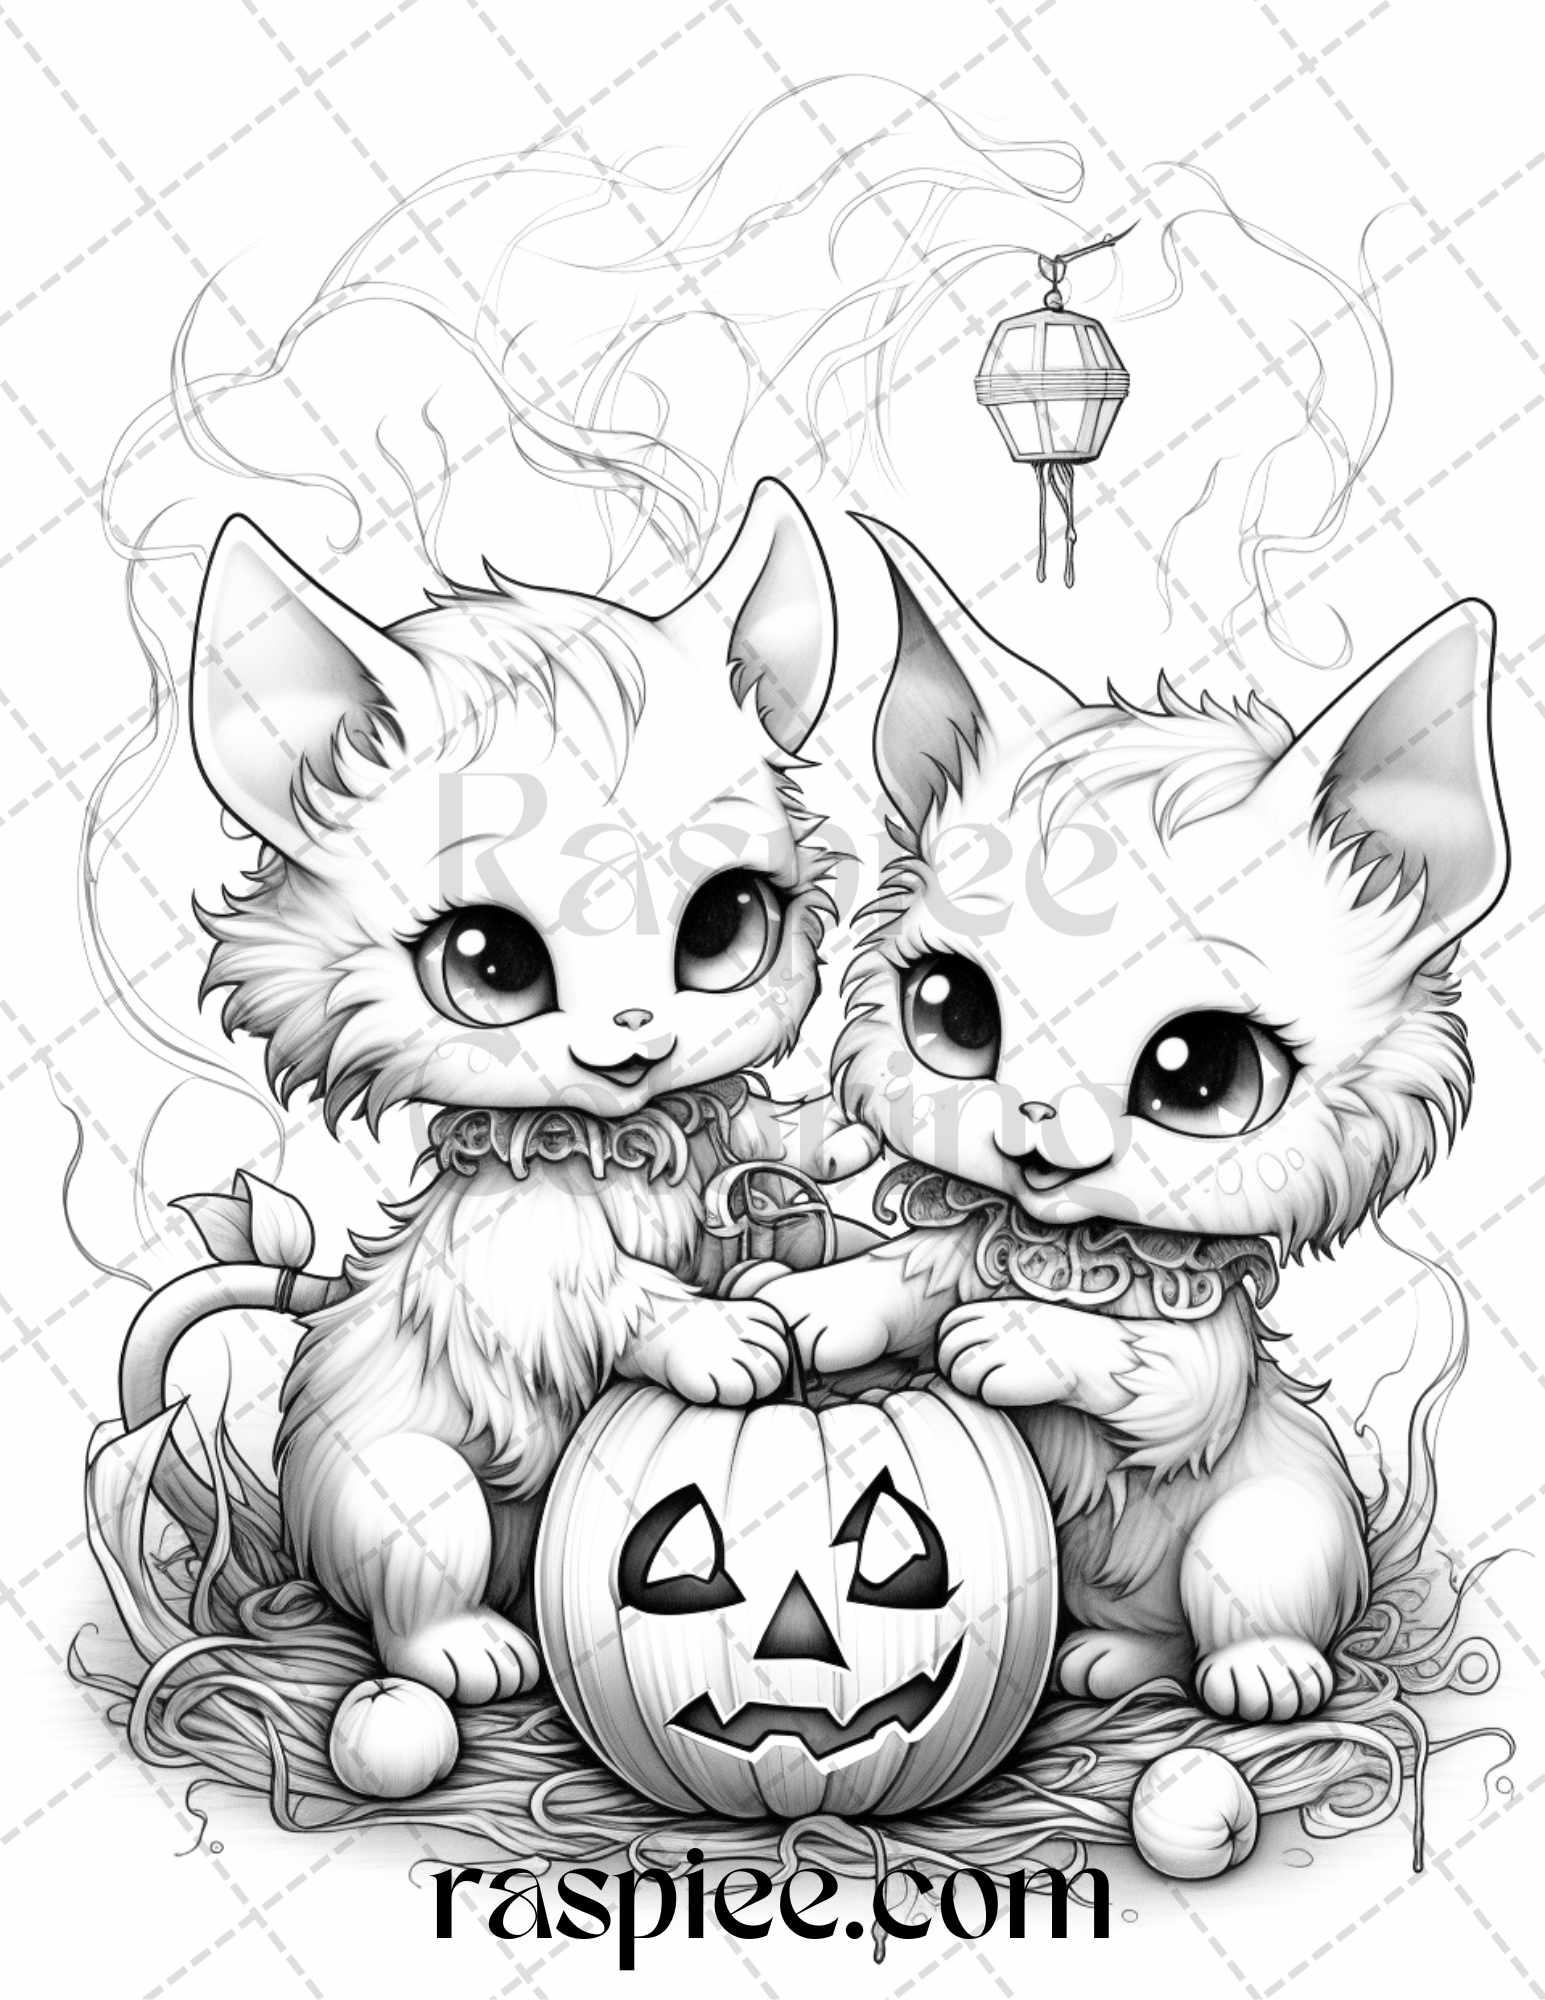 Halloween creepy kawaii grayscale coloring pages, printable Halloween coloring PDF, spooky art therapy printables, grayscale Halloween illustrations, DIY coloring sheets for adults and kids